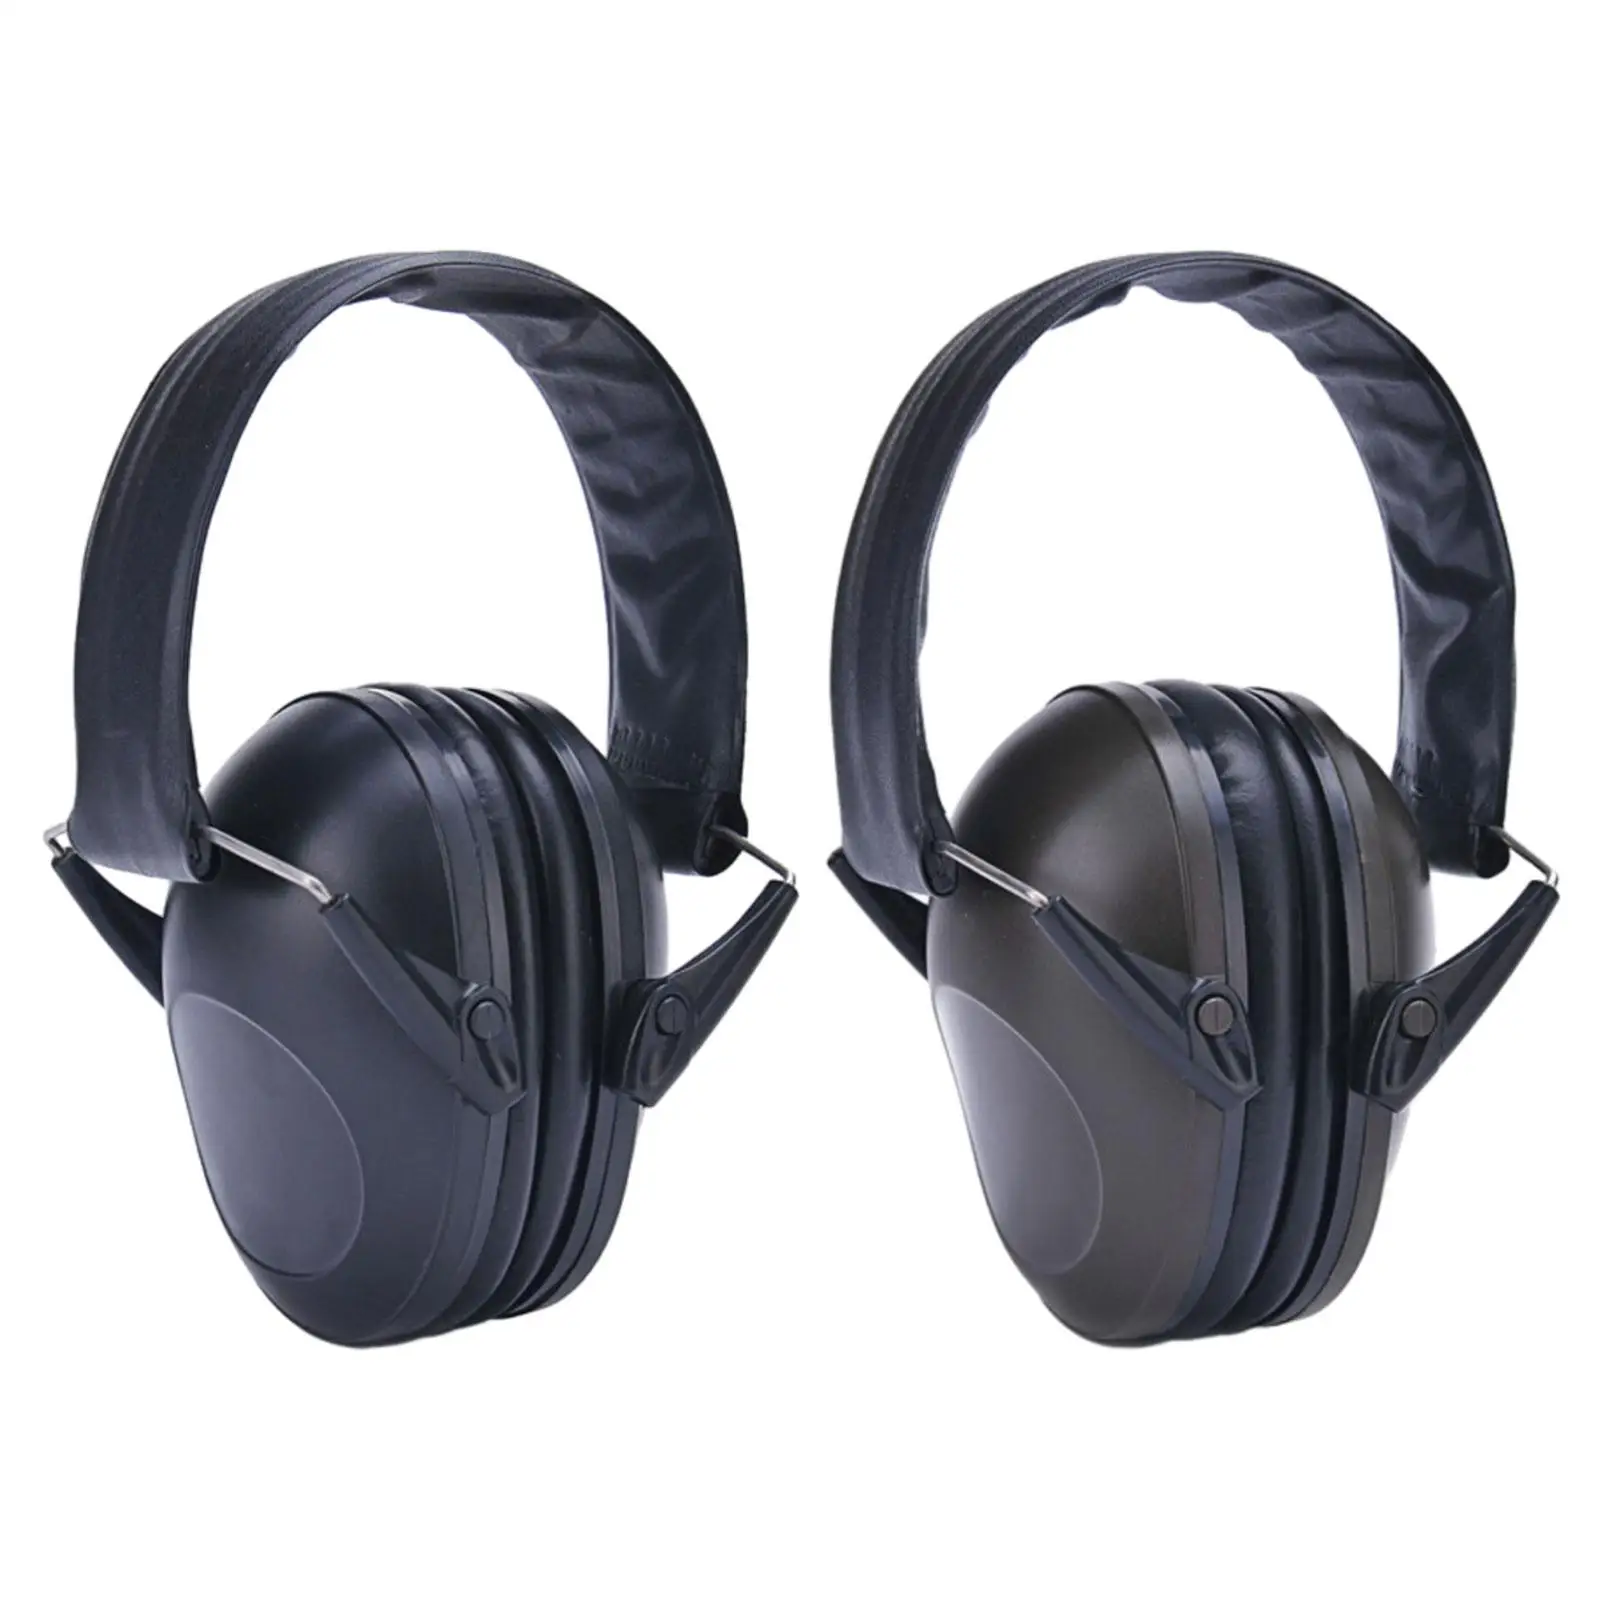 Hearing Ear Protection Noise Reduction Soundproof Earmuffs Comfortable Ear Protector for Airplane Gaming Office Studying Mowing